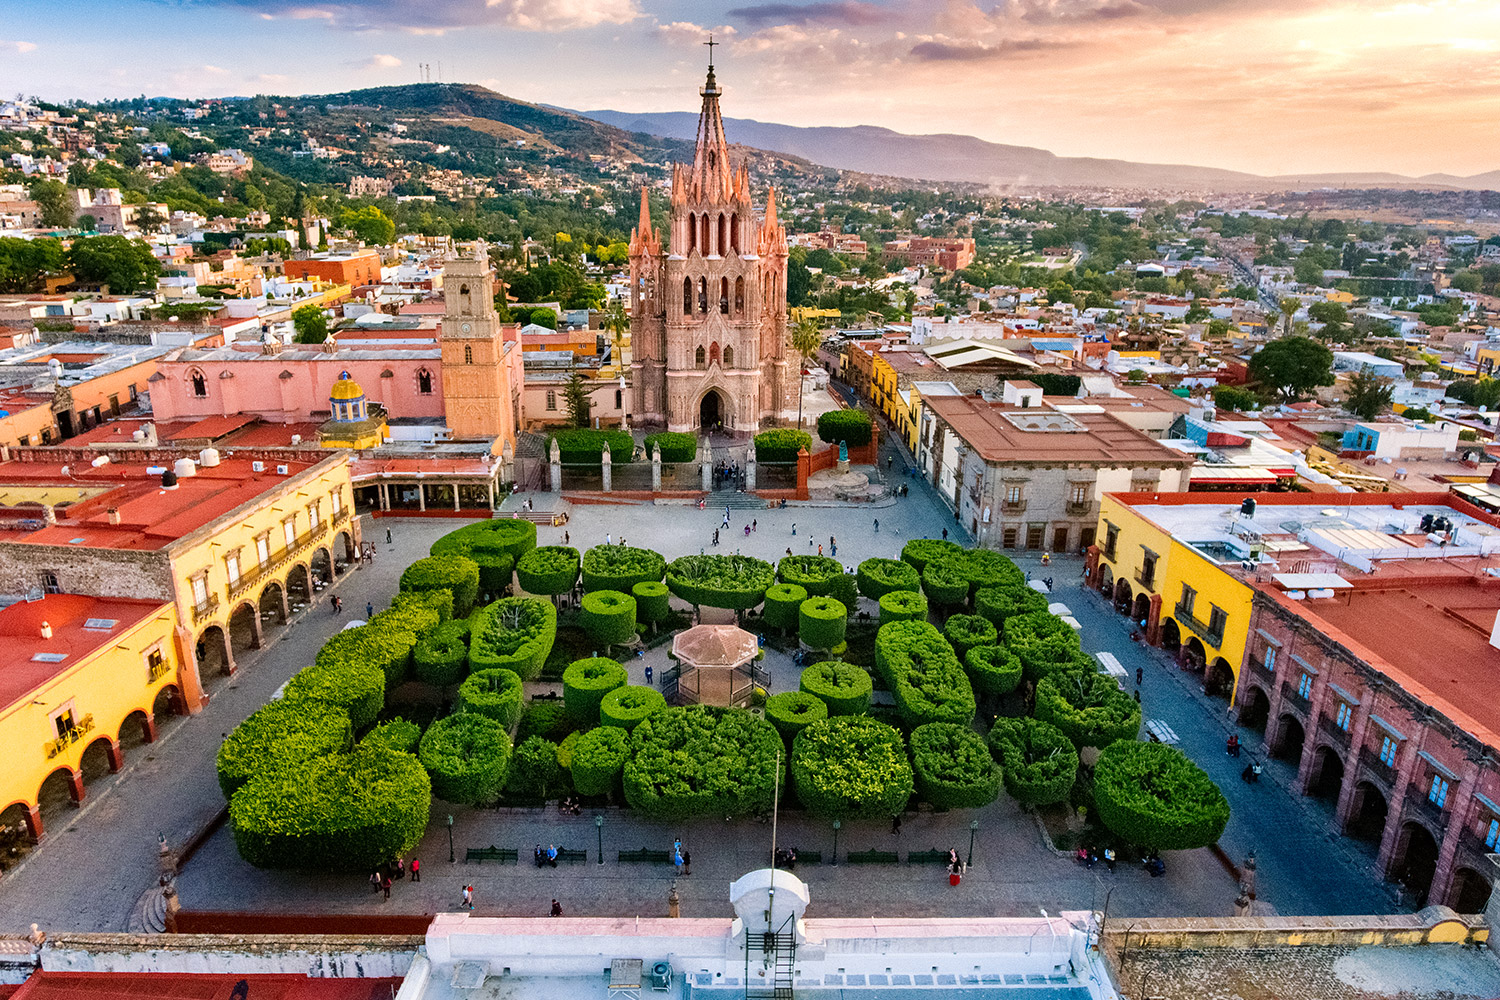 View of town square in San Miguel de Allende Mexico